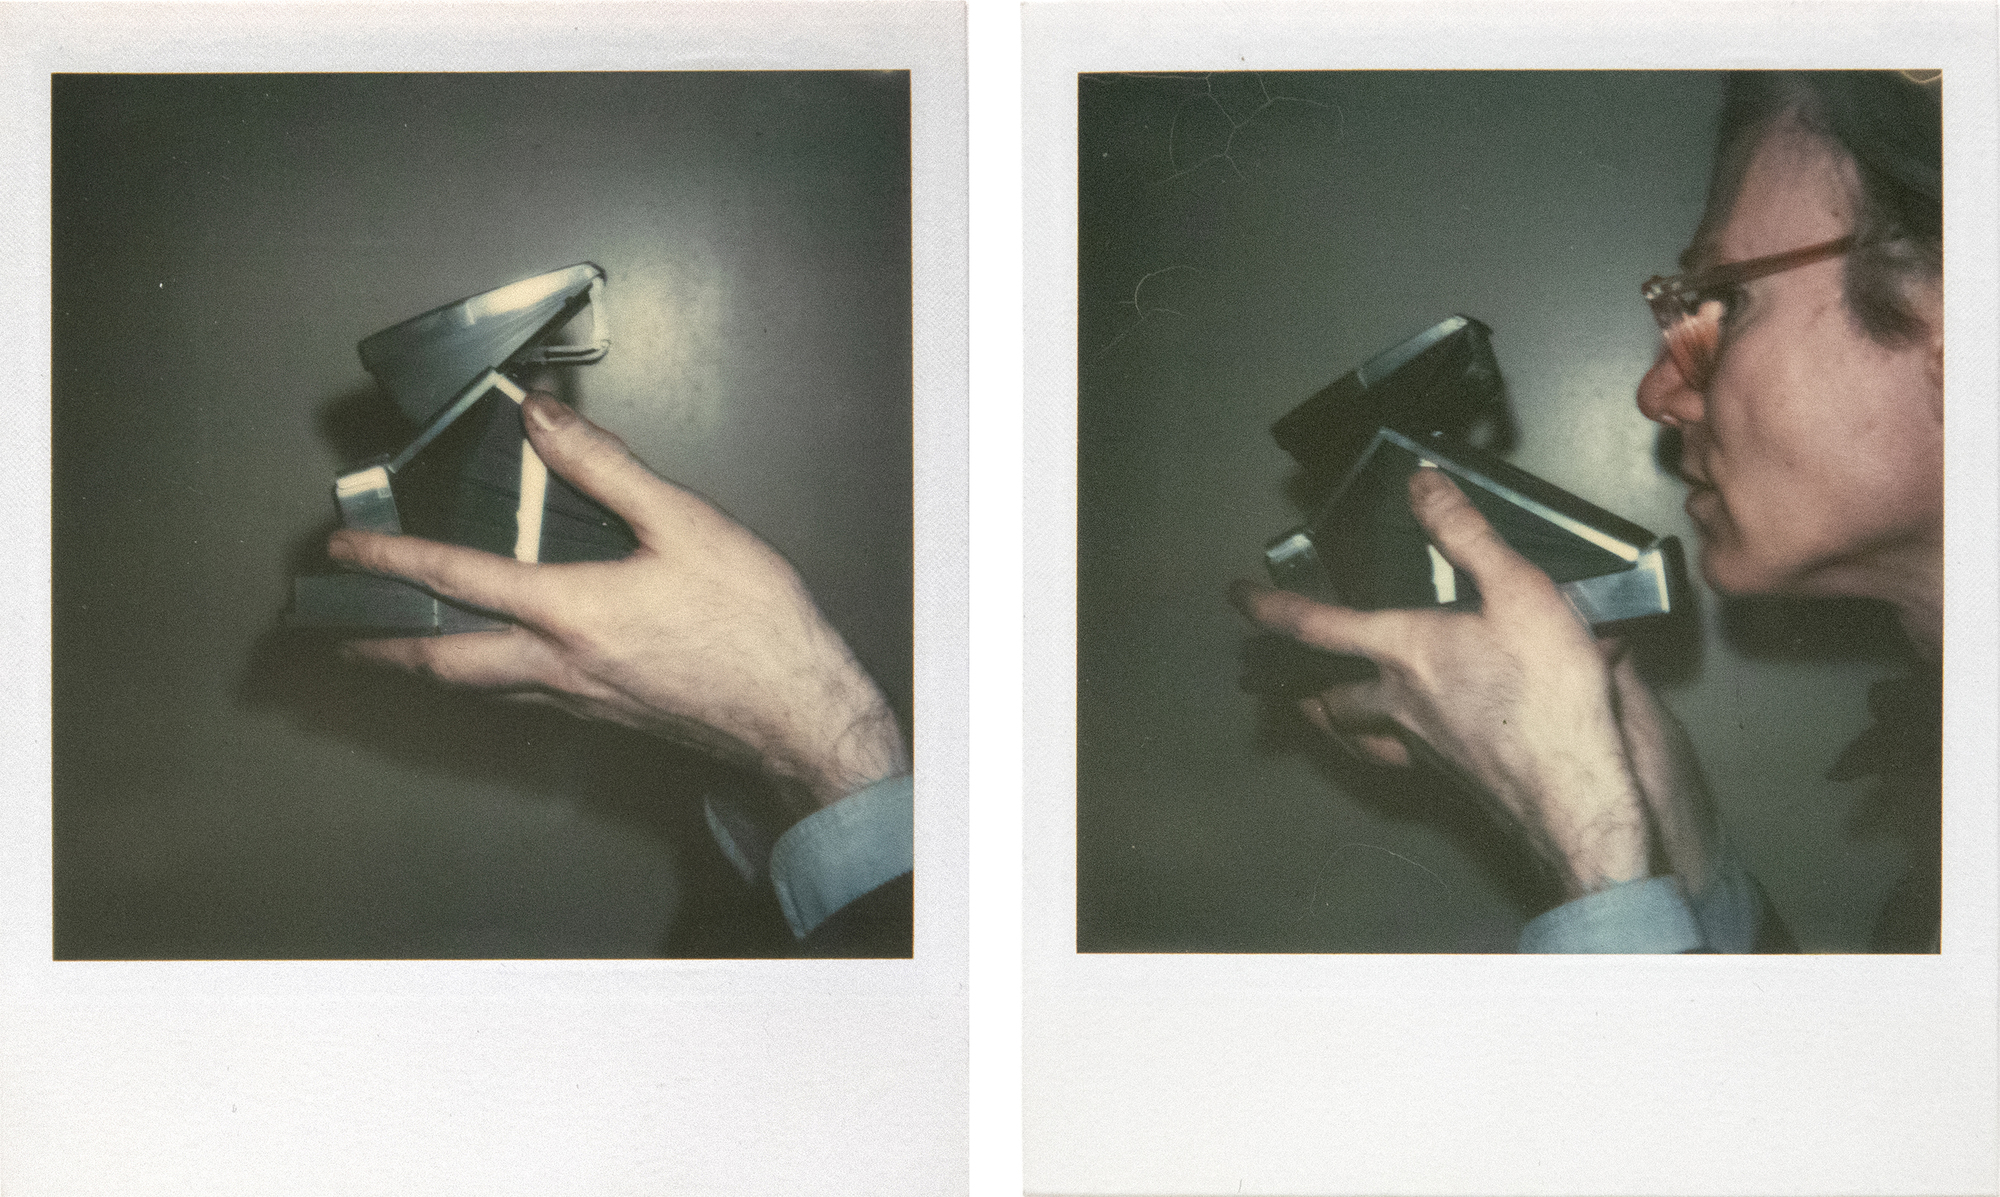 ANDY WARHOL - Self-Portrait with Camera (diptych) - Polaroid, Polacolor - 4 1/4 x 3 3/8 in. ea.